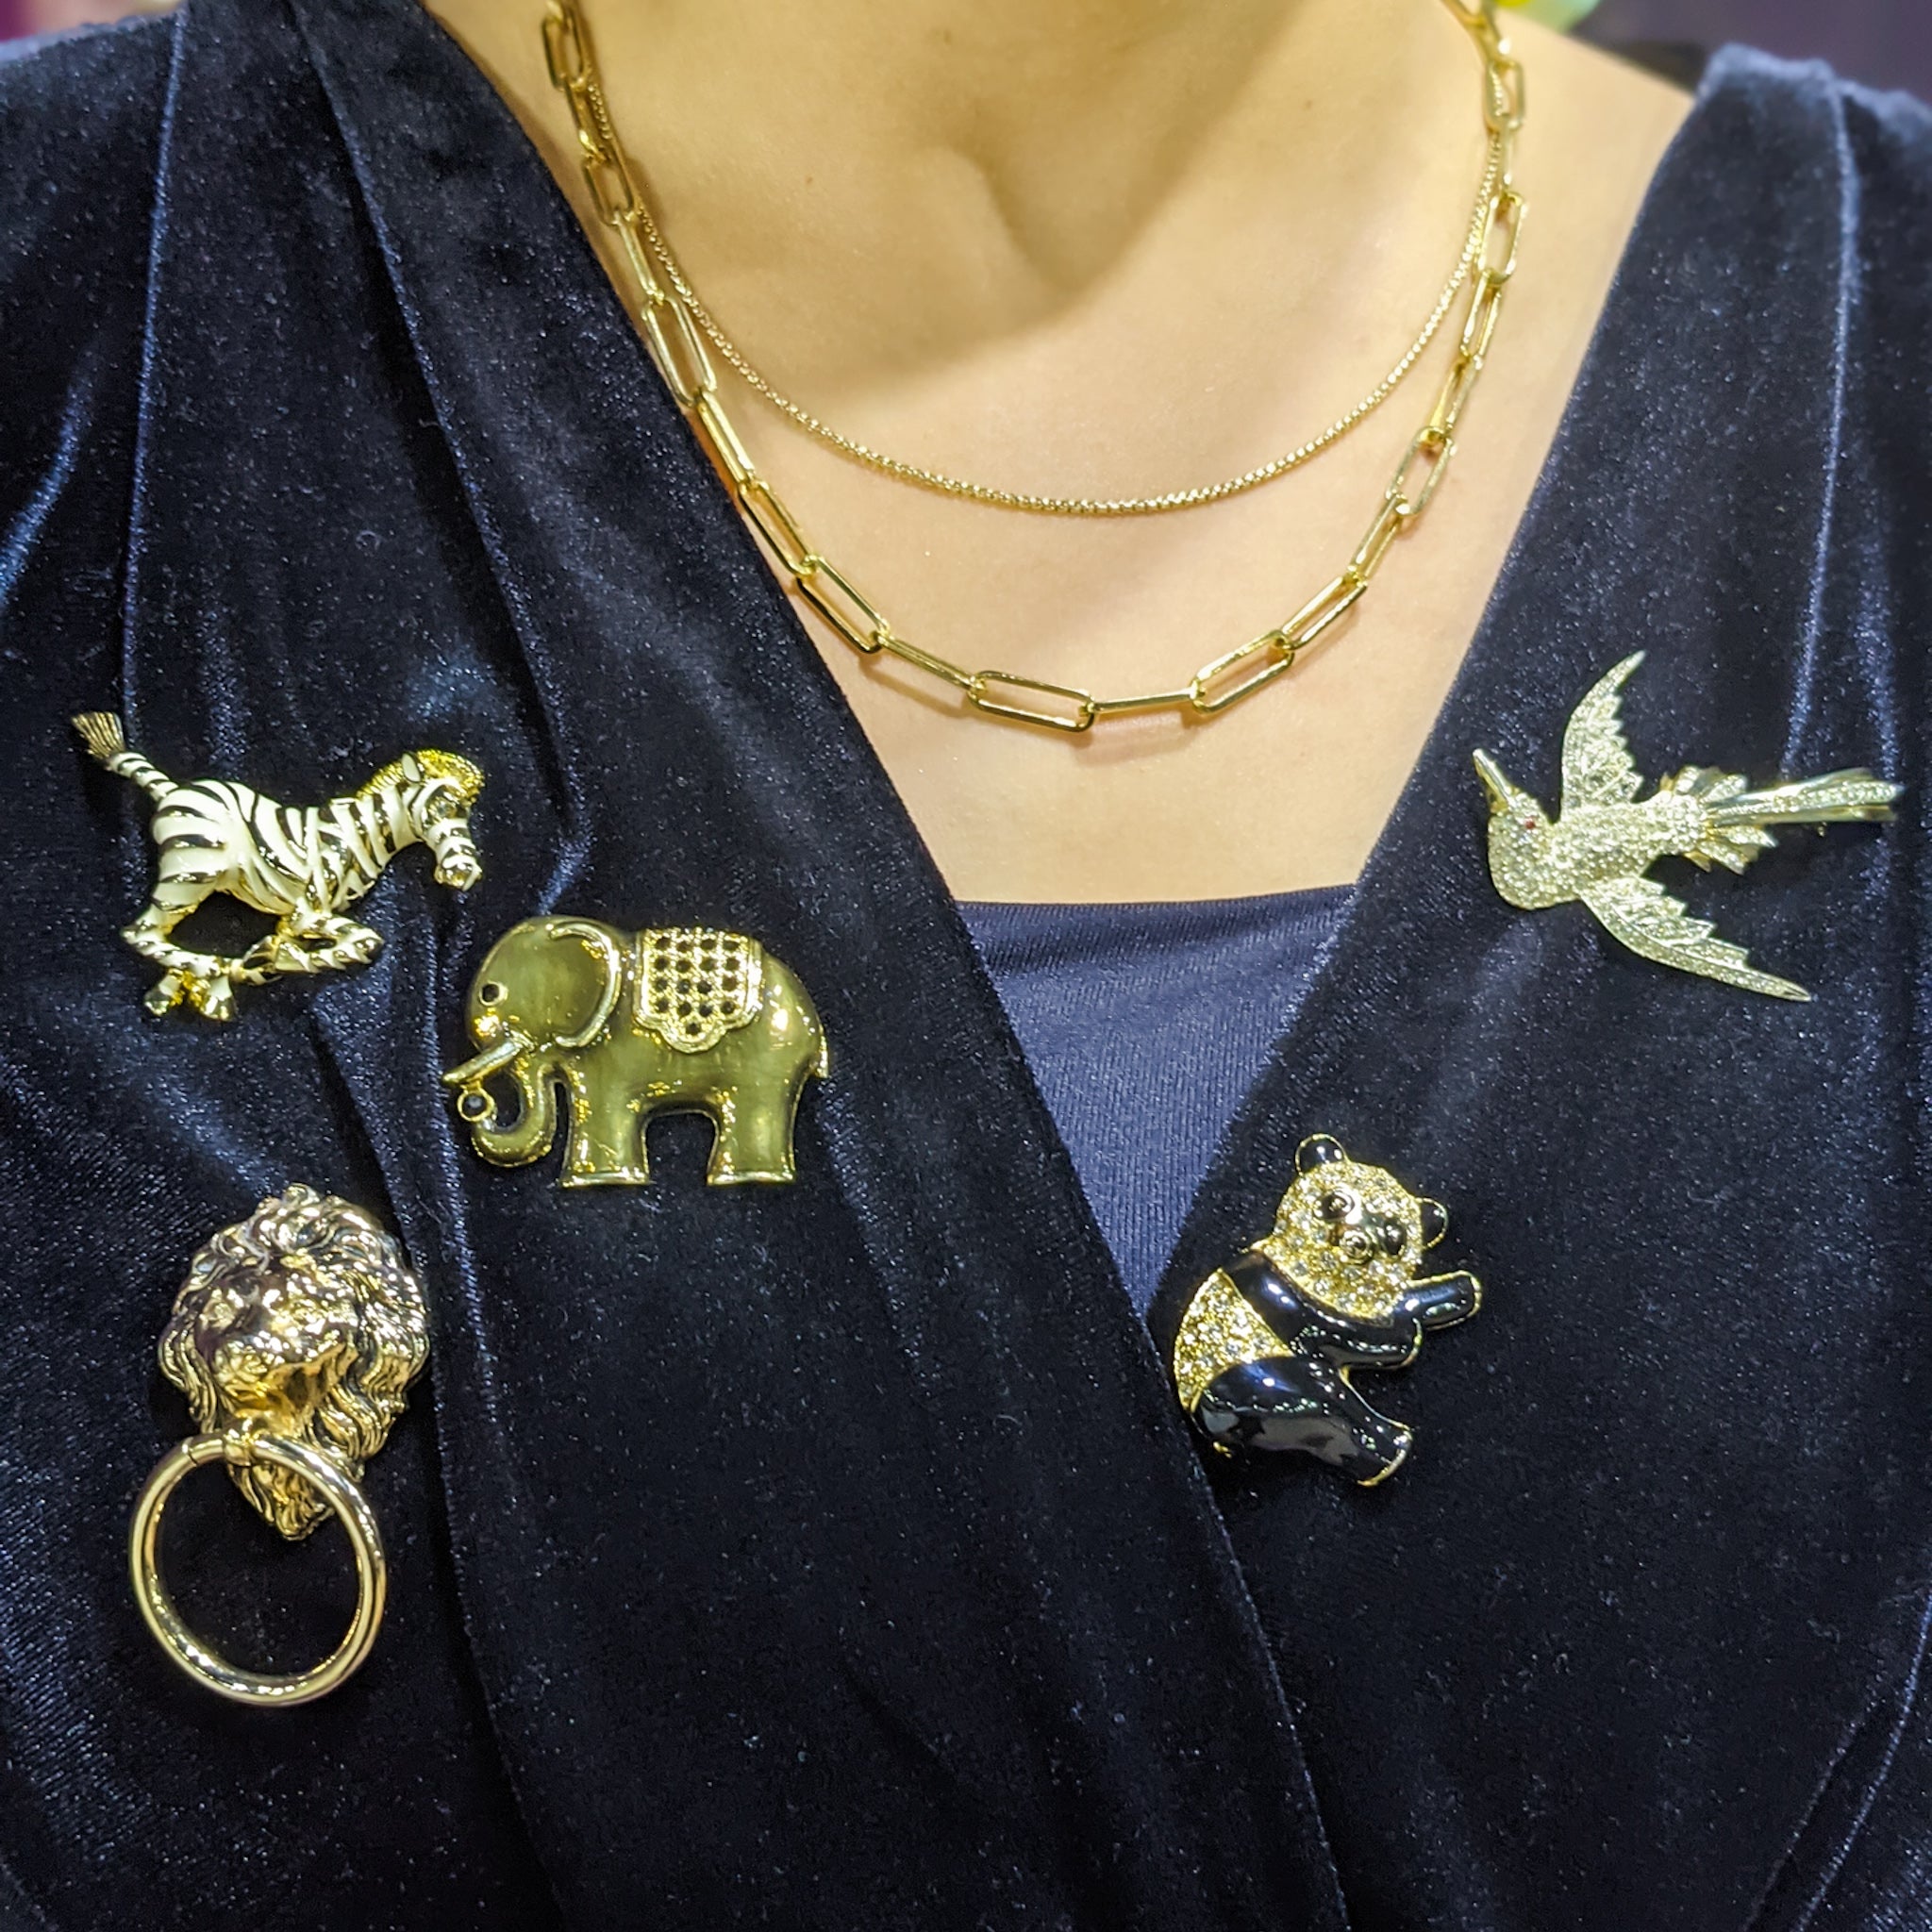 Collection of YazJewels vintage animal brooches worn on woman’s shirt